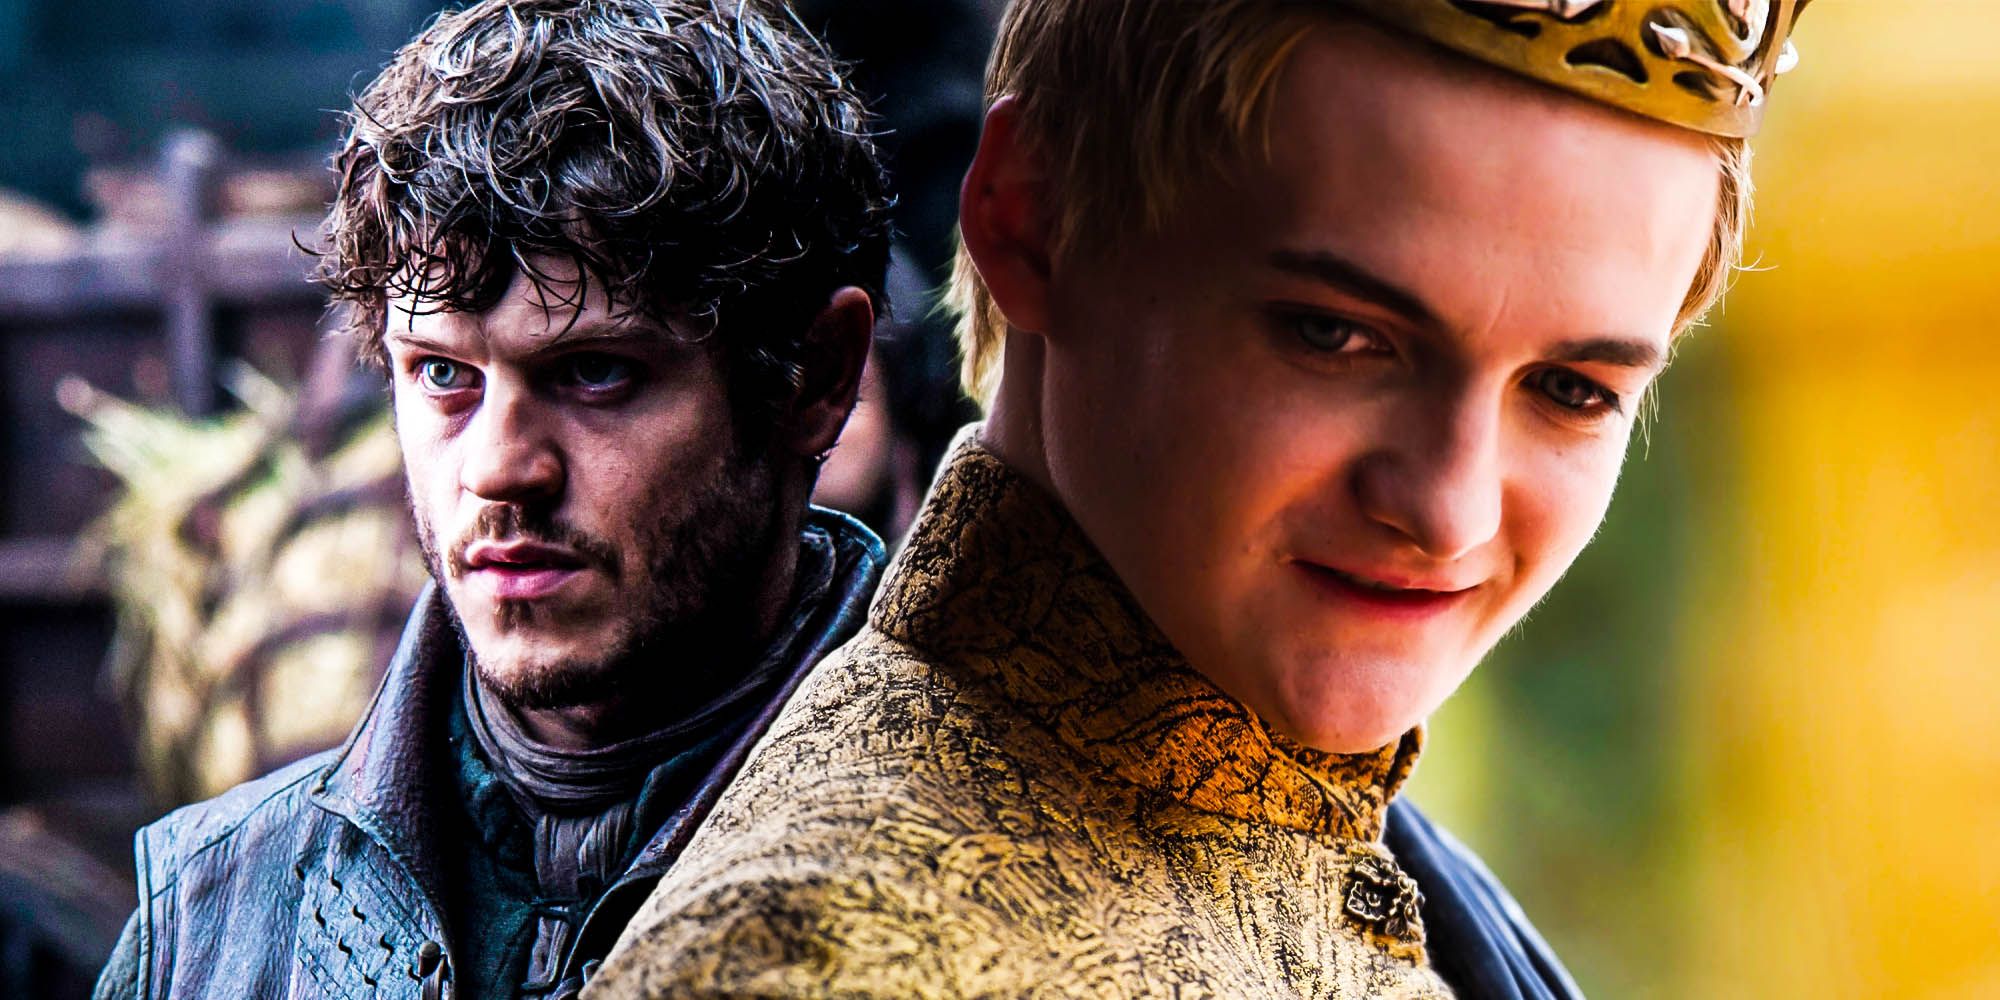 Blended image of Ramsay Bolton and Joffrey Baratheon in Game of Thrones.